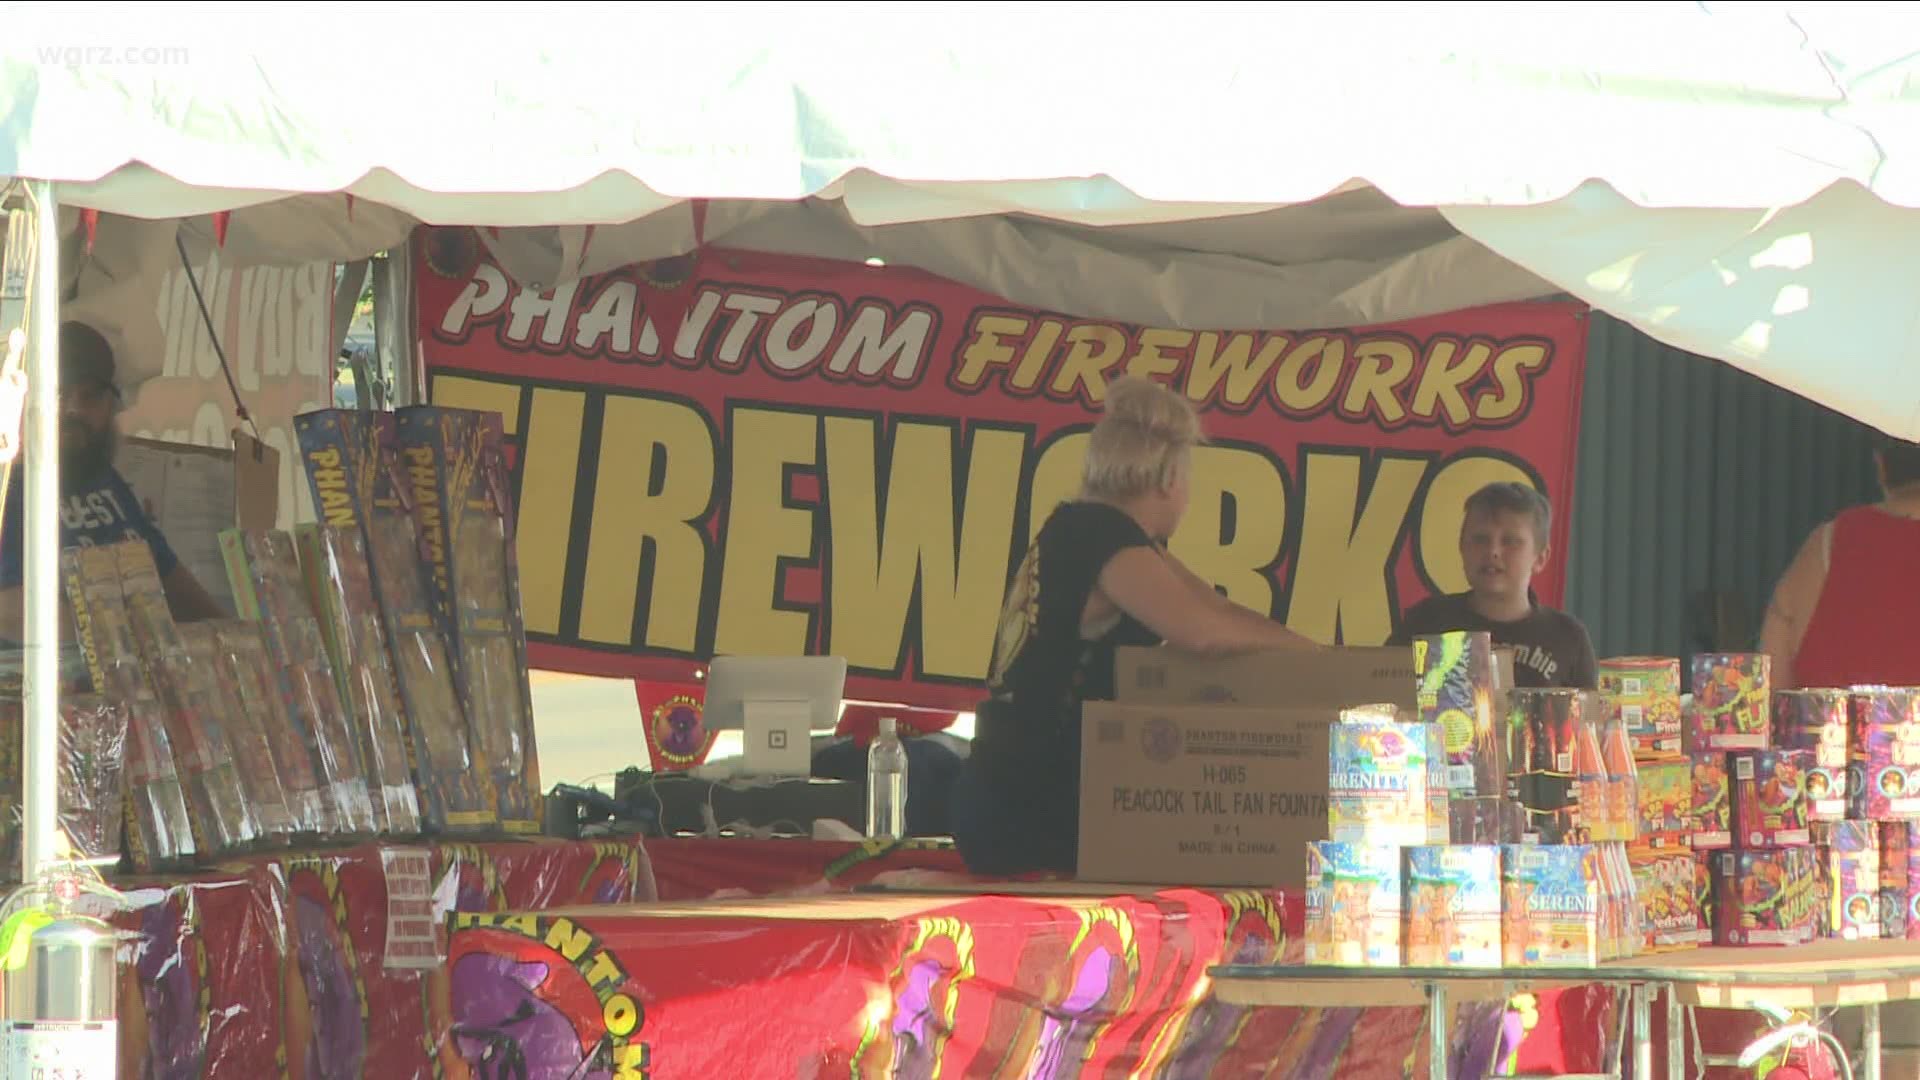 Concerns over nightly fireworks in Buffalo